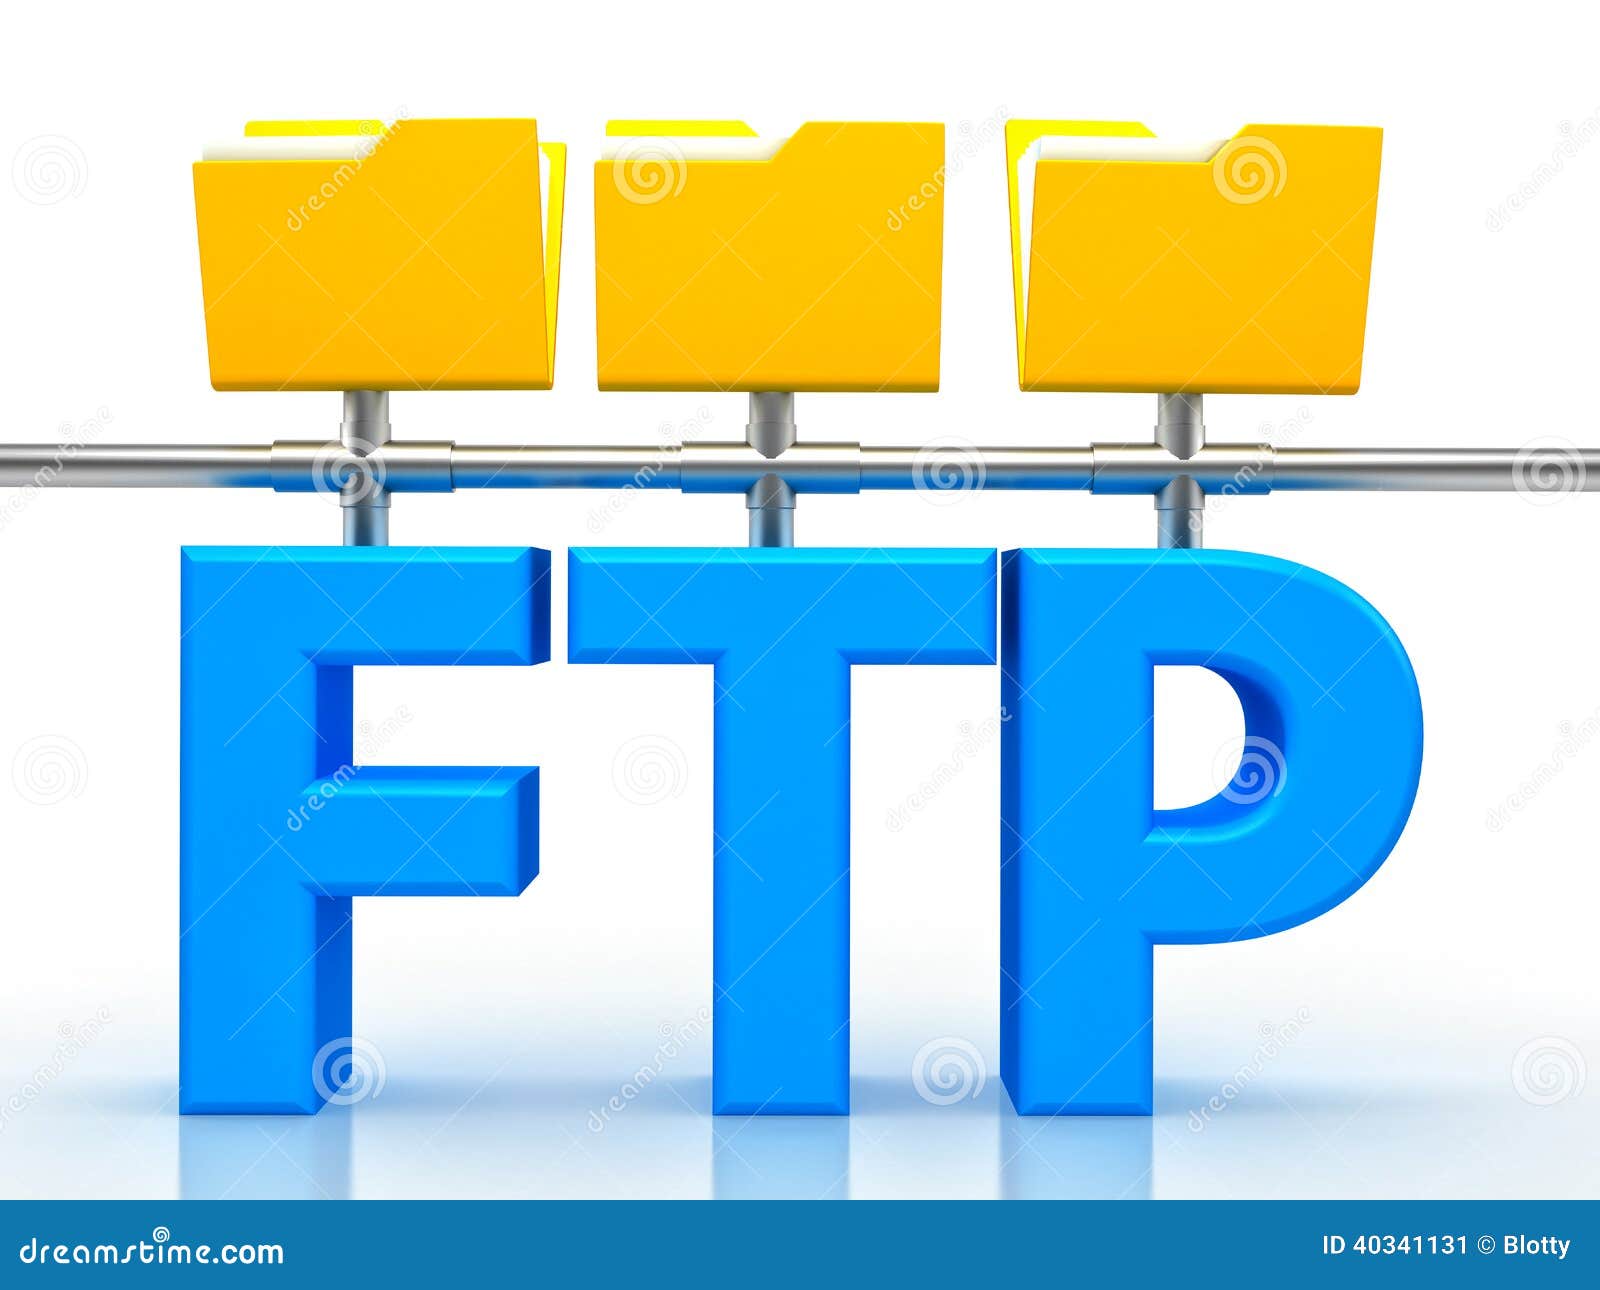 How To Work With File Transfer Protocol (FTP)? - Loginworks